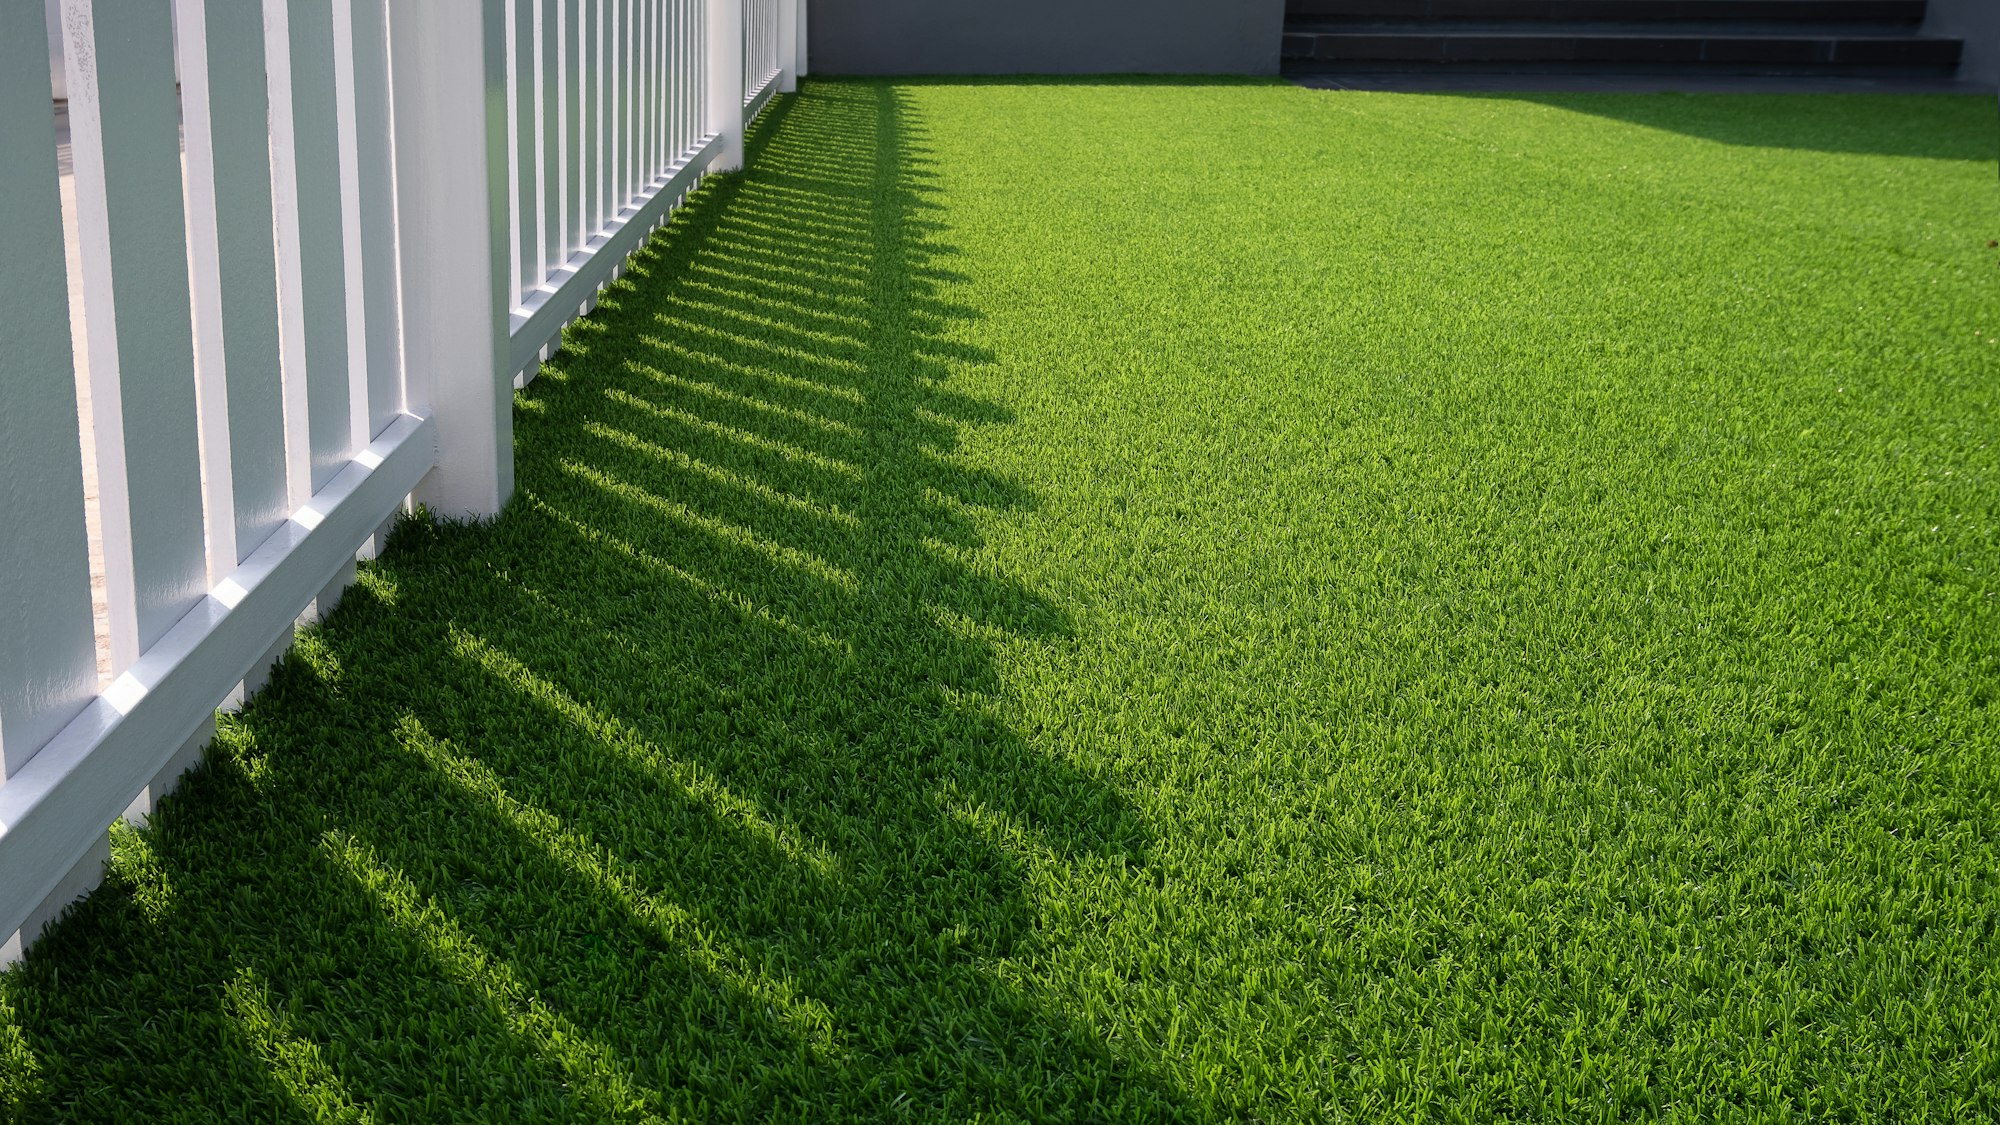 Sunlight and shadow of white wooden fence on green artificial turf surface in front yard of home